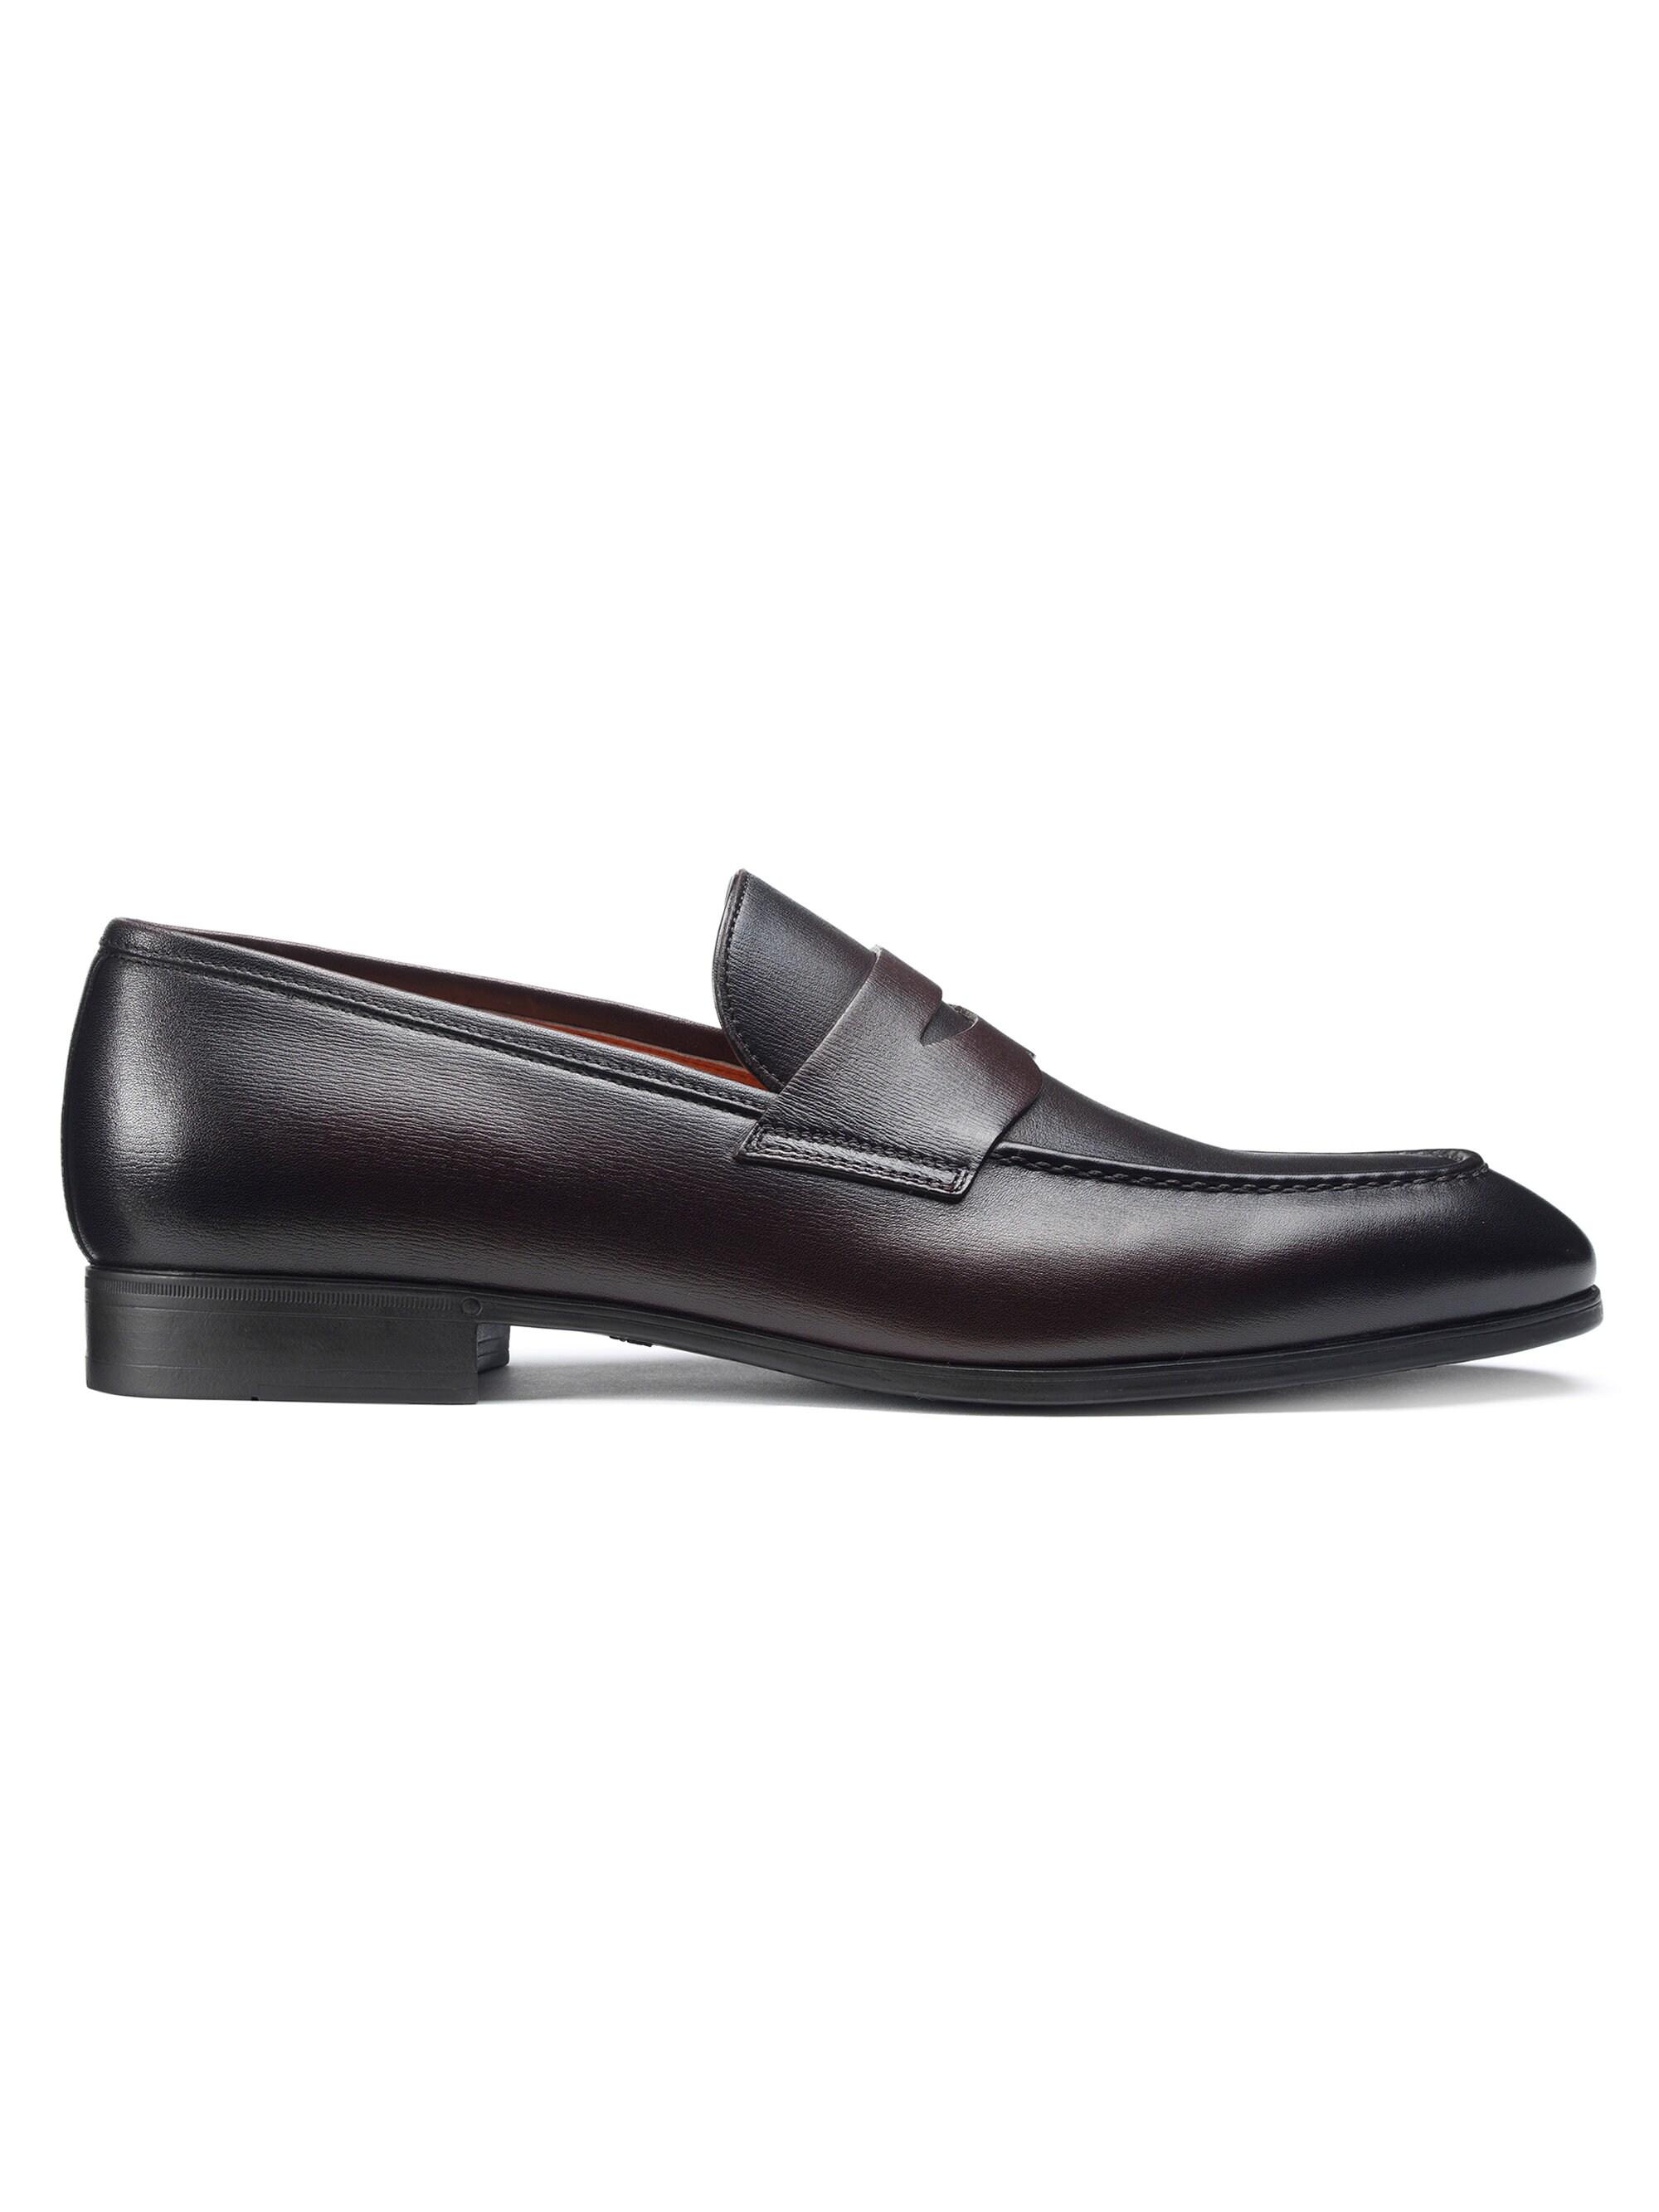 Santoni Men's Leather Penny Loafers - Brown in Brown for Men - Lyst